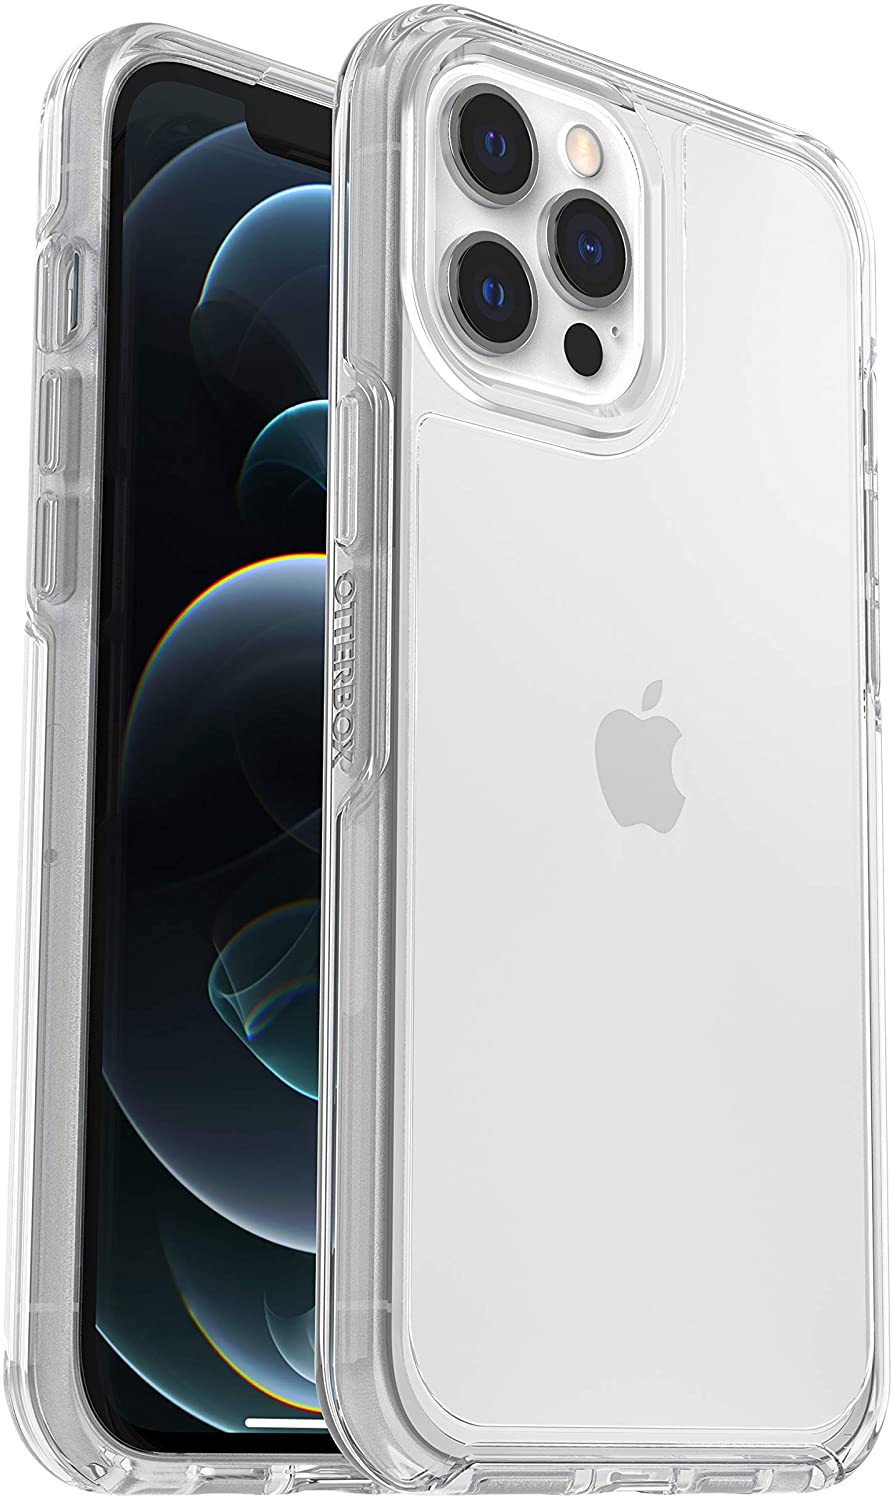 OtterBox SYMMETRY SERIES Case for Apple iPhone 12 Pro Max - Clear (Certified Refurbished)